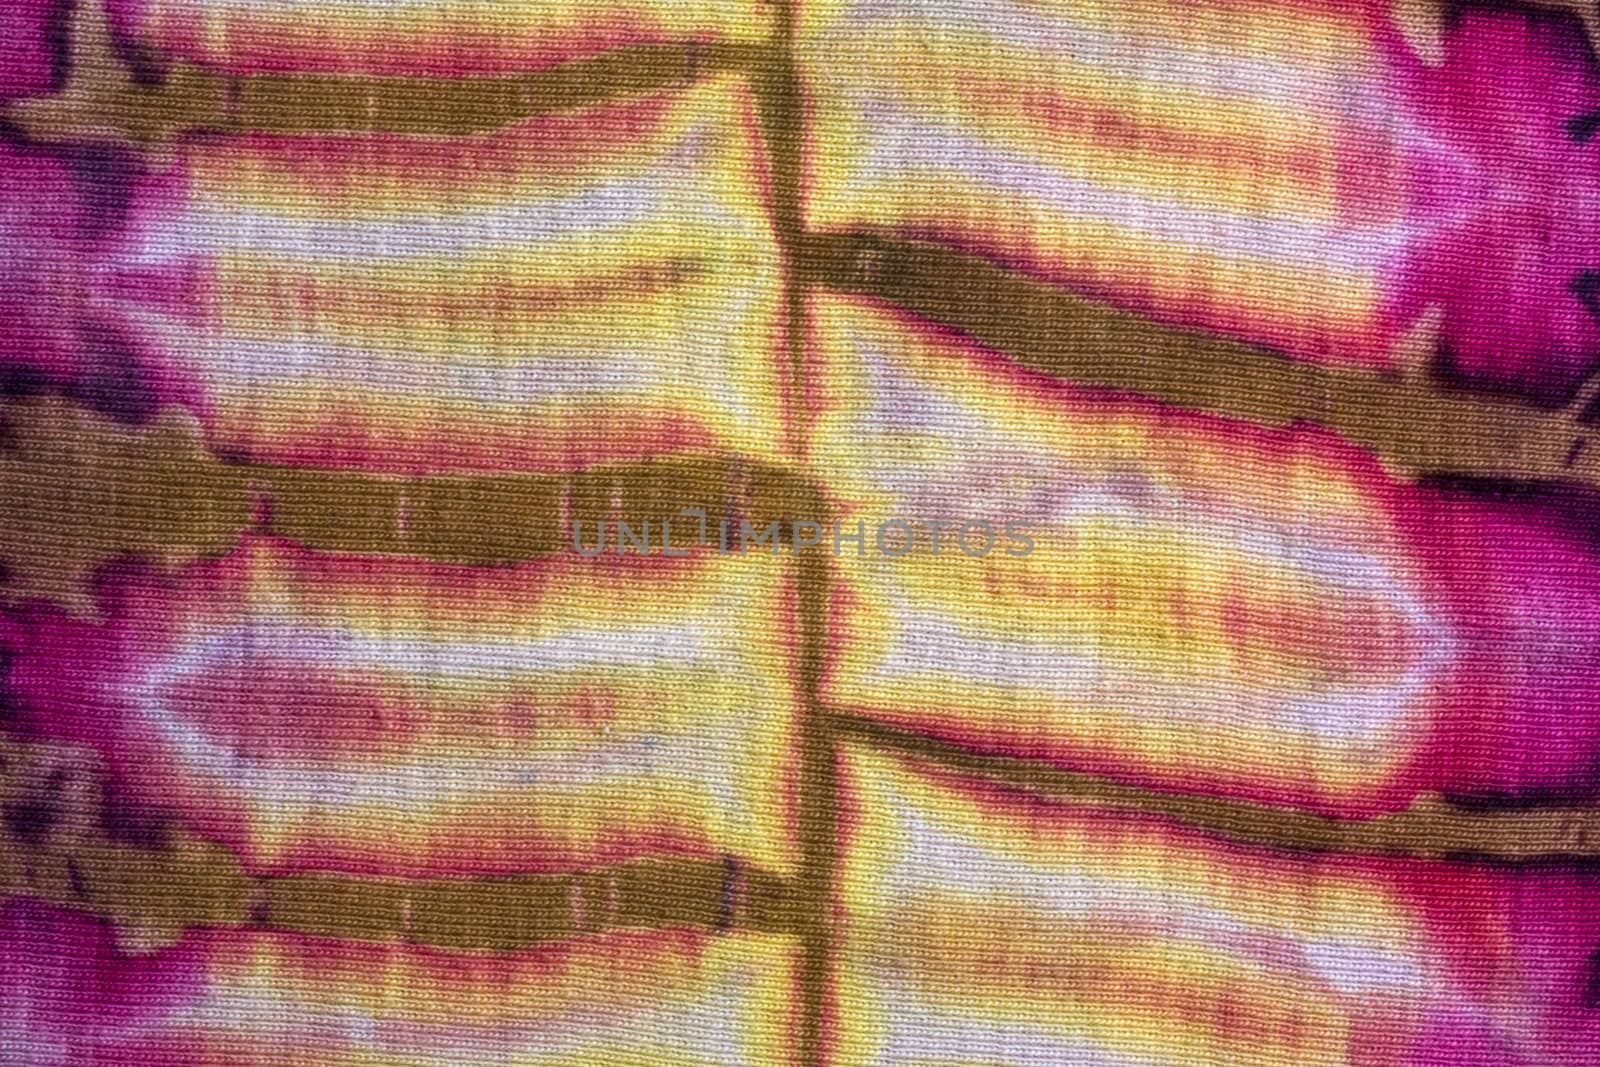 Texture of abstract  batik textile by ibphoto